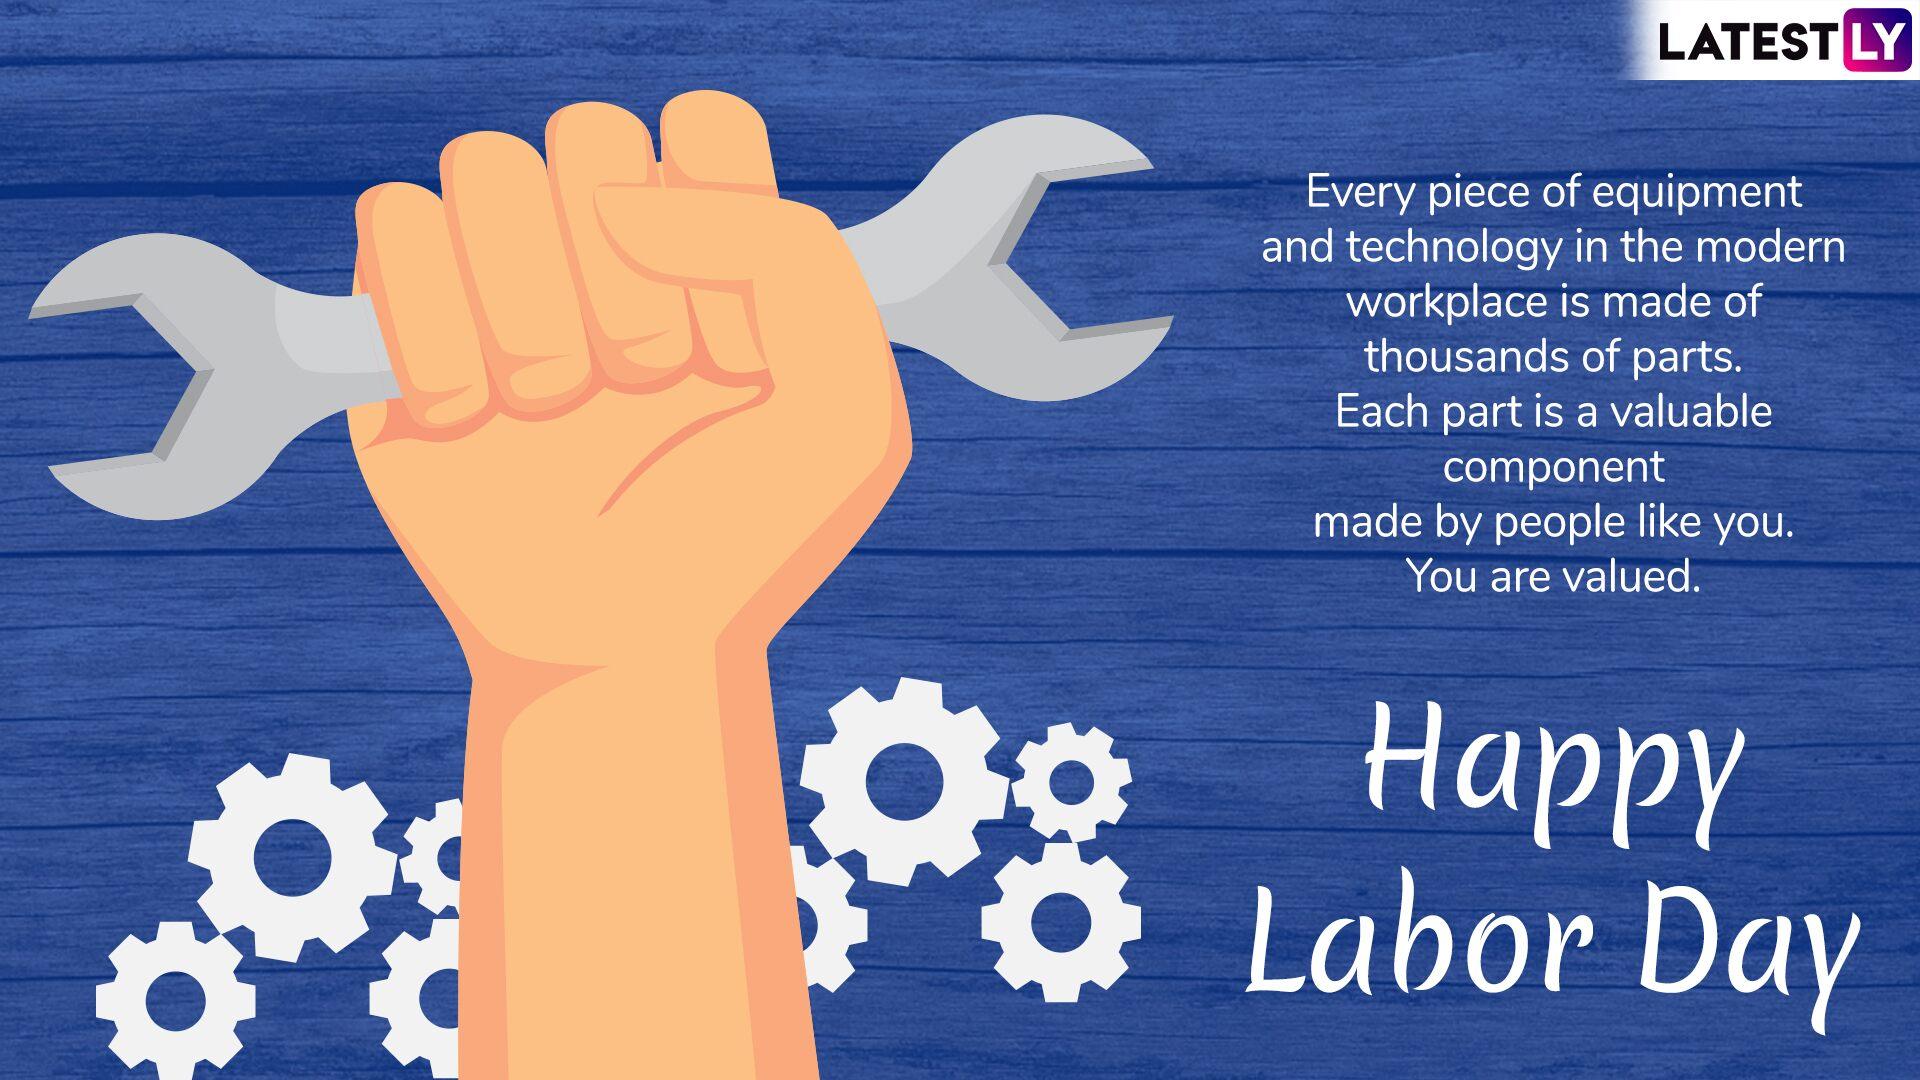 Happy Labour Day 2019 Greetings & Wishes: WhatsApp Stickers, May Day